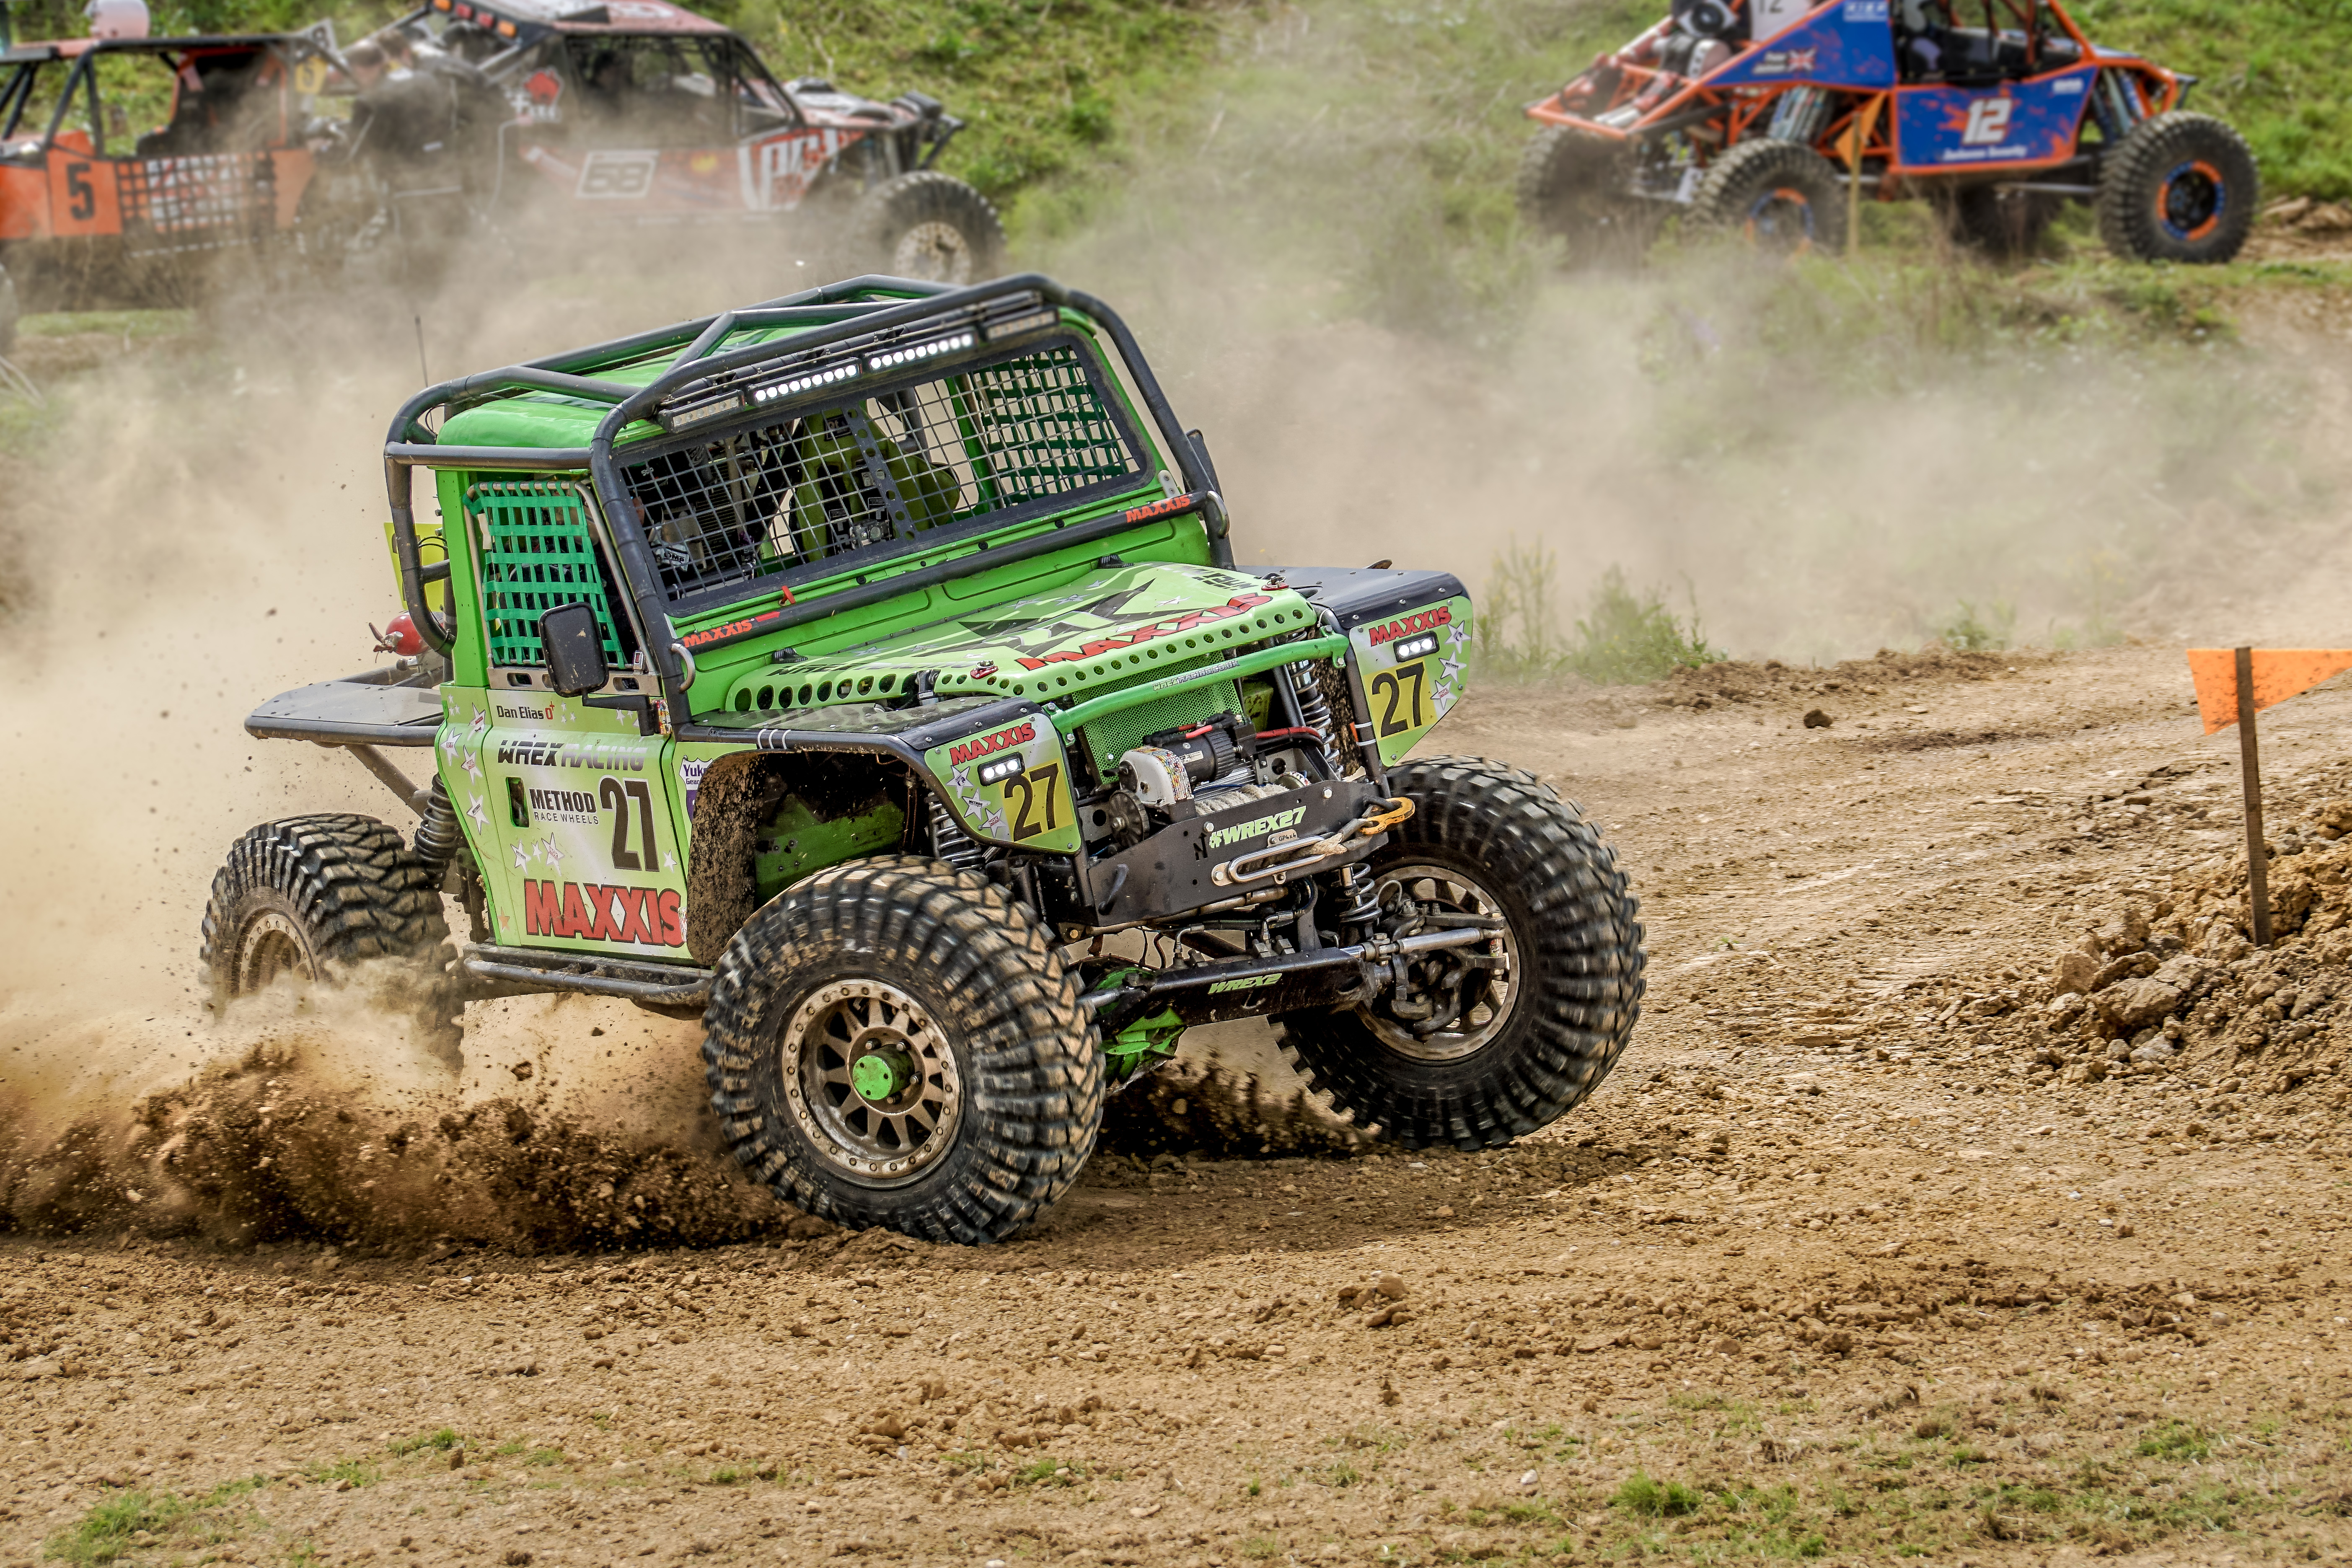 Wrex Racing Dominates Maxxis King of France